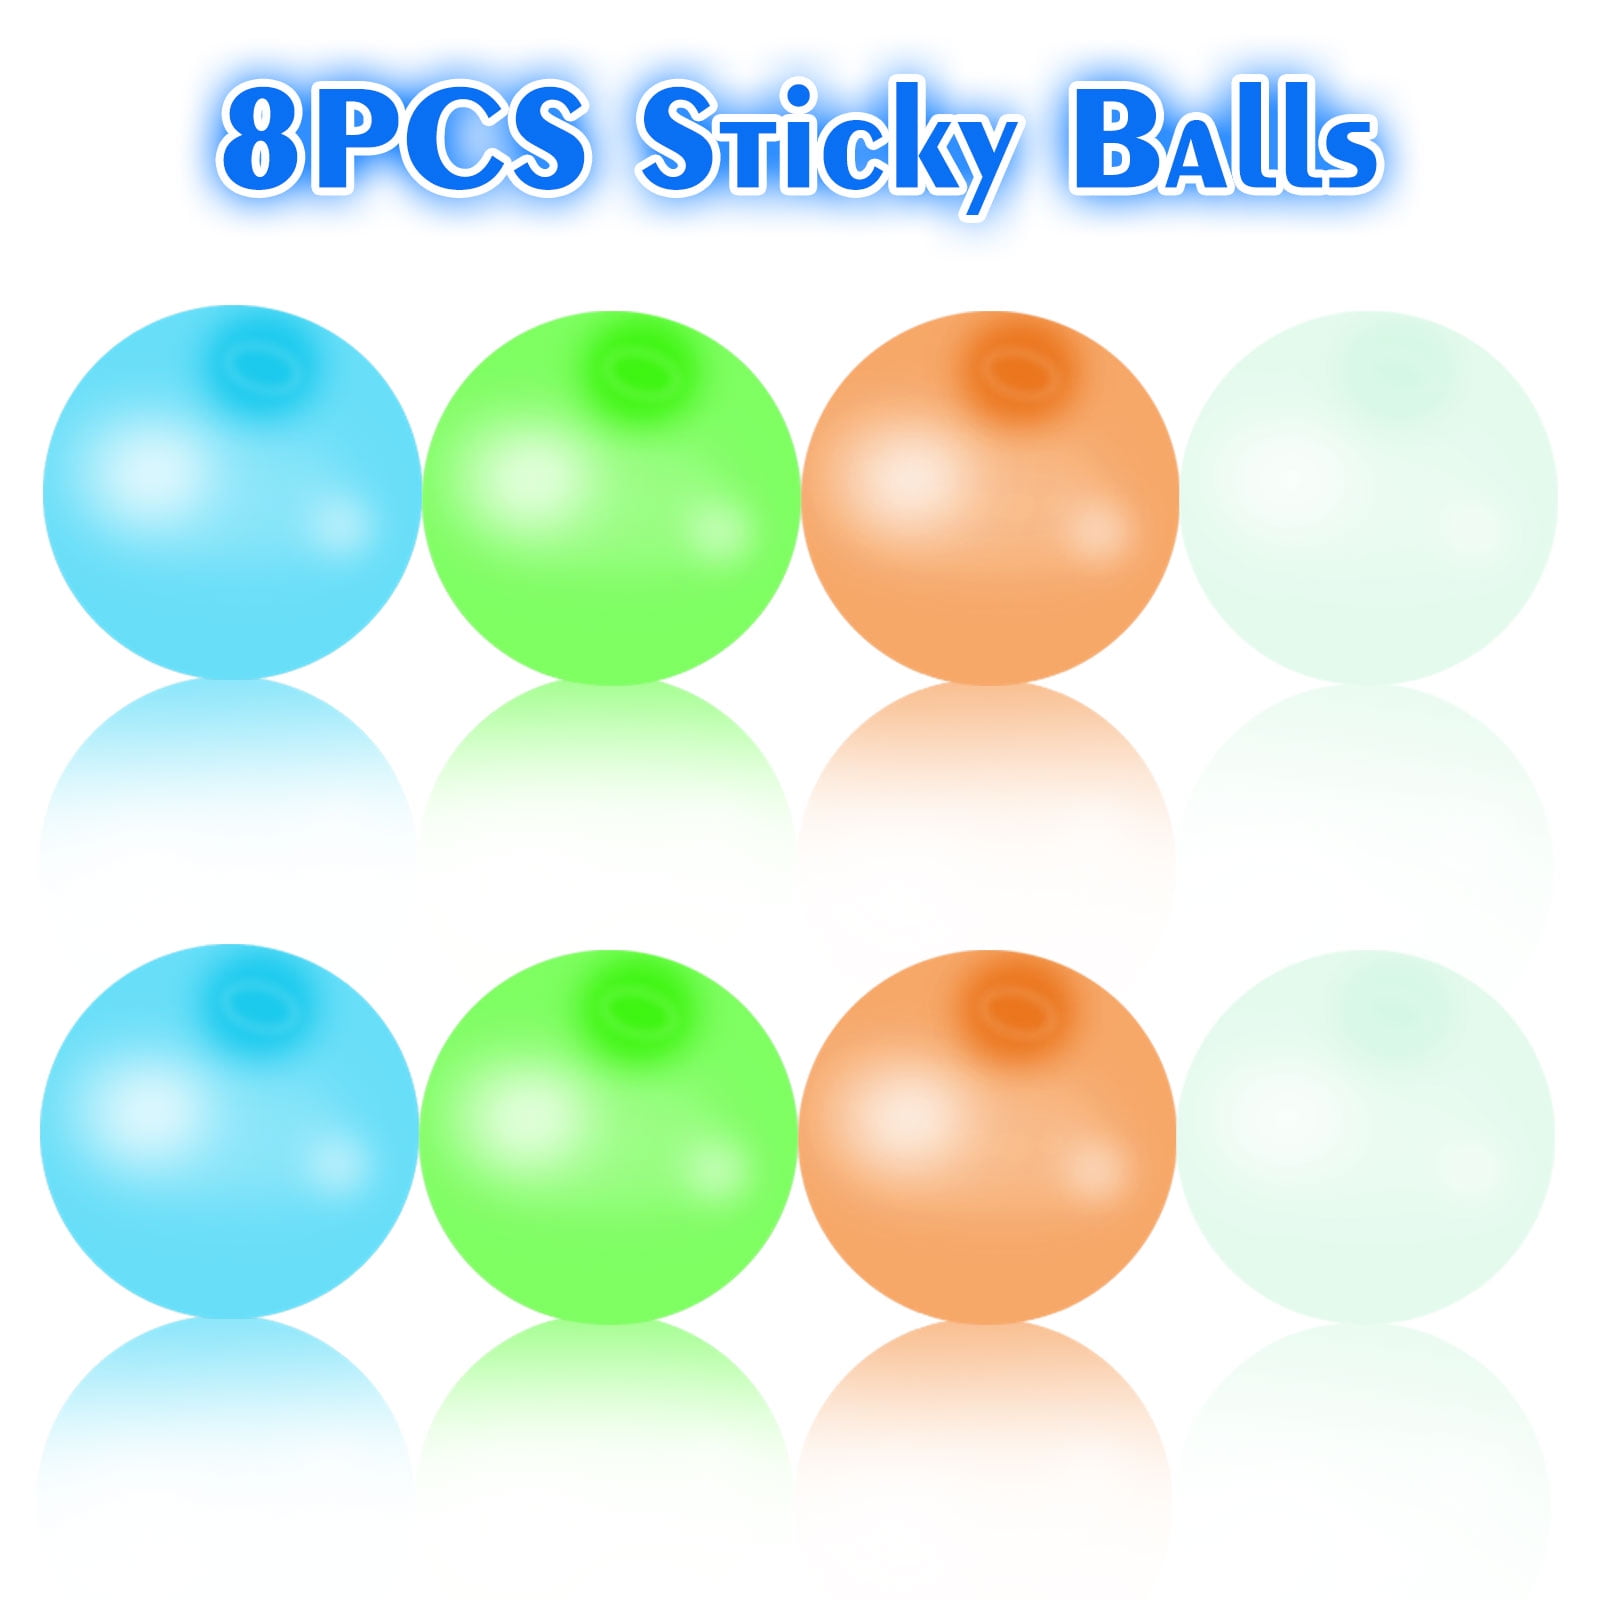 Vooteen 8 Pcs Stress Relief Balls Ceiling Luminescent Sticky Ball Target Anti Stress Relieve Balls OCD Squishy Glow Stress Relief Toy for Kids and Adults Funny Toy for ADHD Tear-Resistant Anxiety 